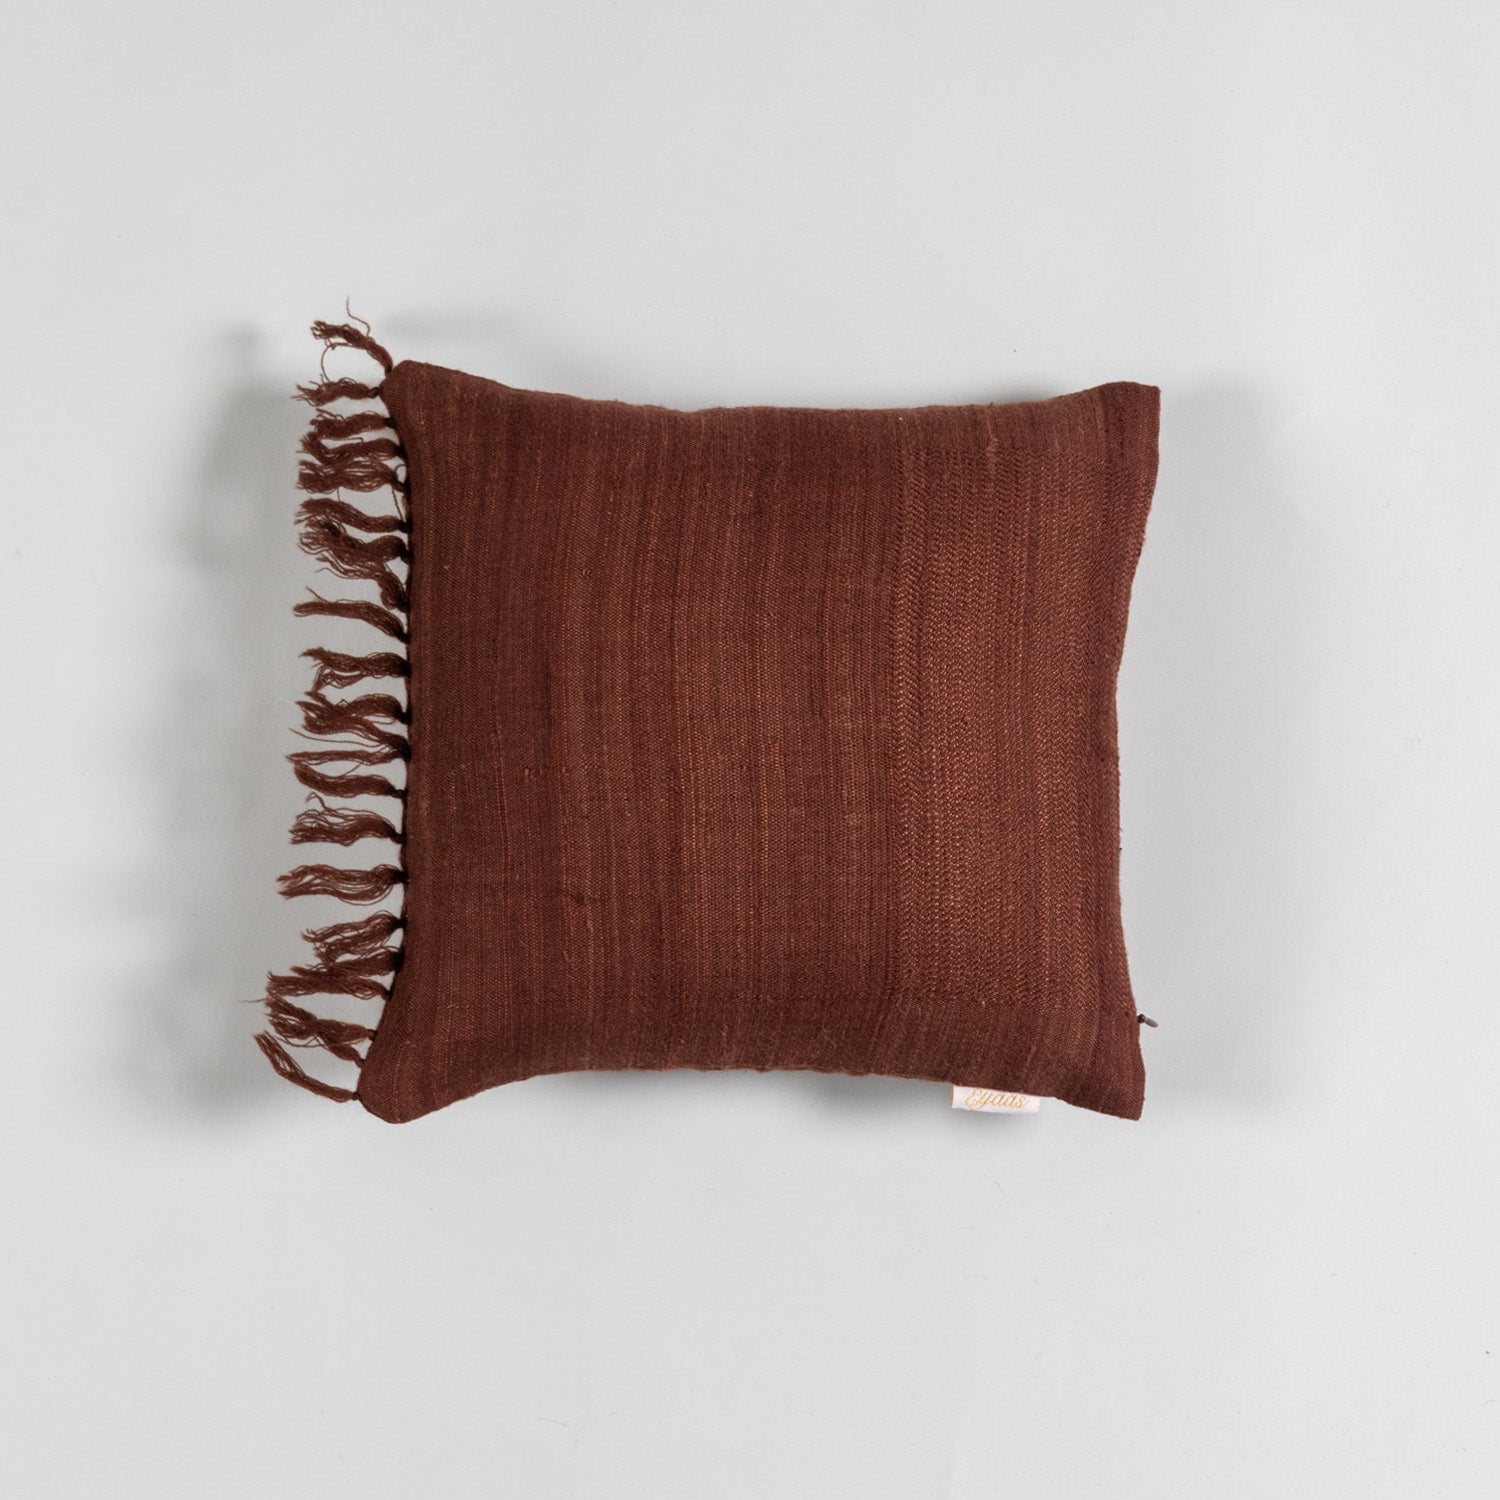 Handwoven Upcycled Chocolate Brown Wool & Oak Silk Cushion Cover - 12x12